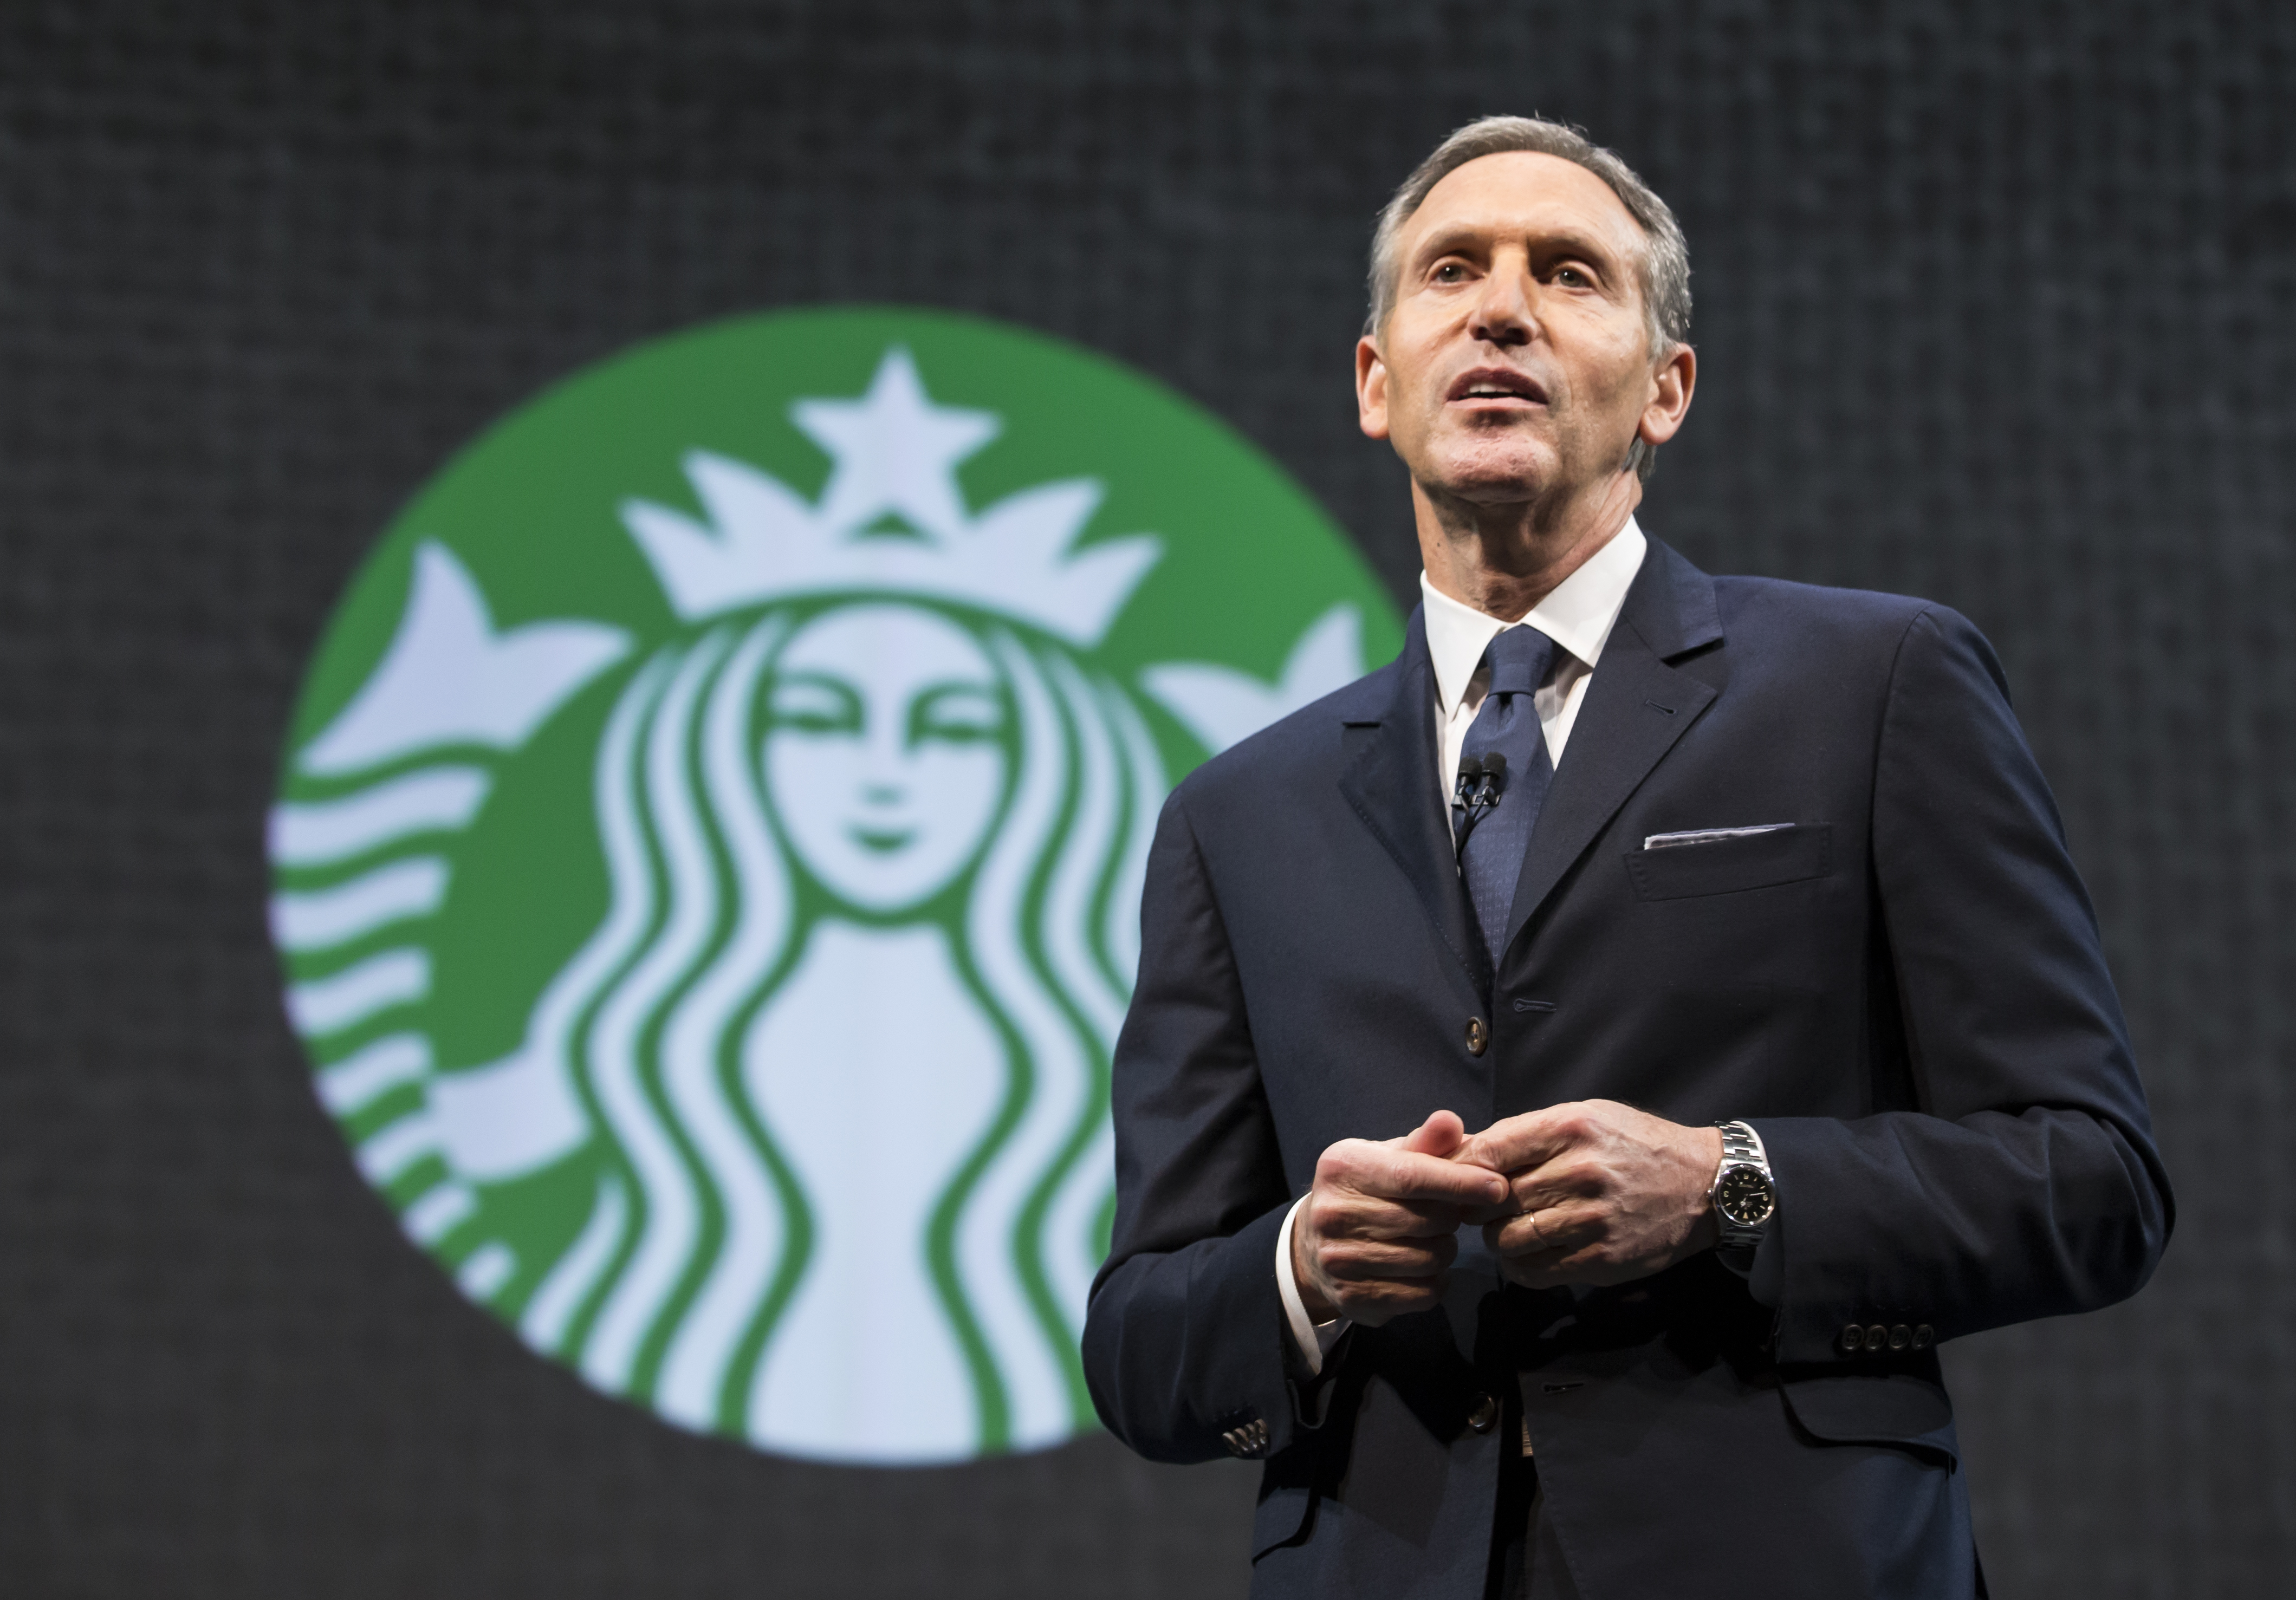 Starbucks Chairman and CEO Howard Schultz speaks during Starbucks annual shareholders meeting March 18, 2015 in Seattle, Washington. (Stephen Brashear—Getty Images)